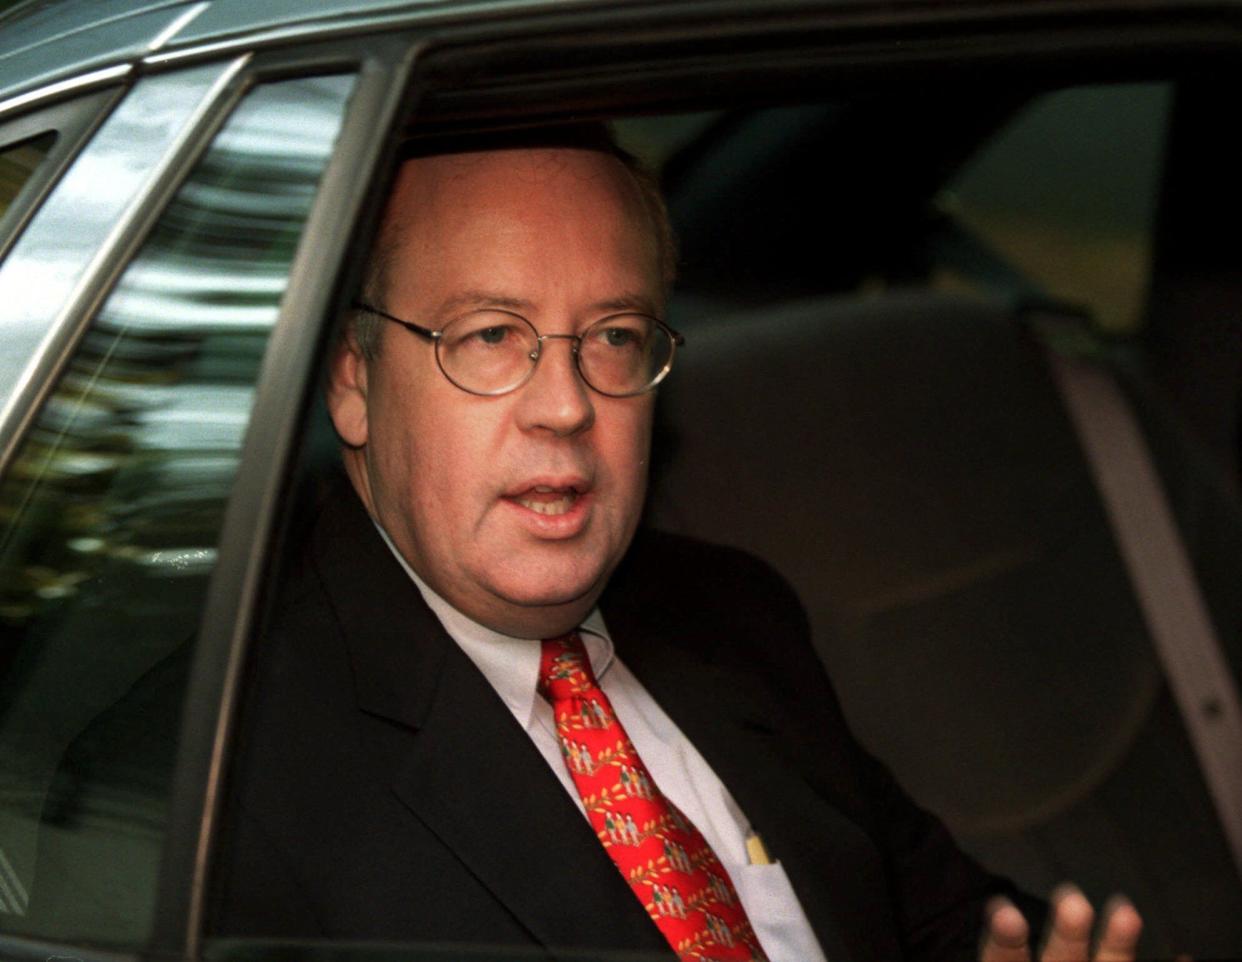 Independent Counsel Kenneth Starr in 1998. (AP Photo/Khue Bui)